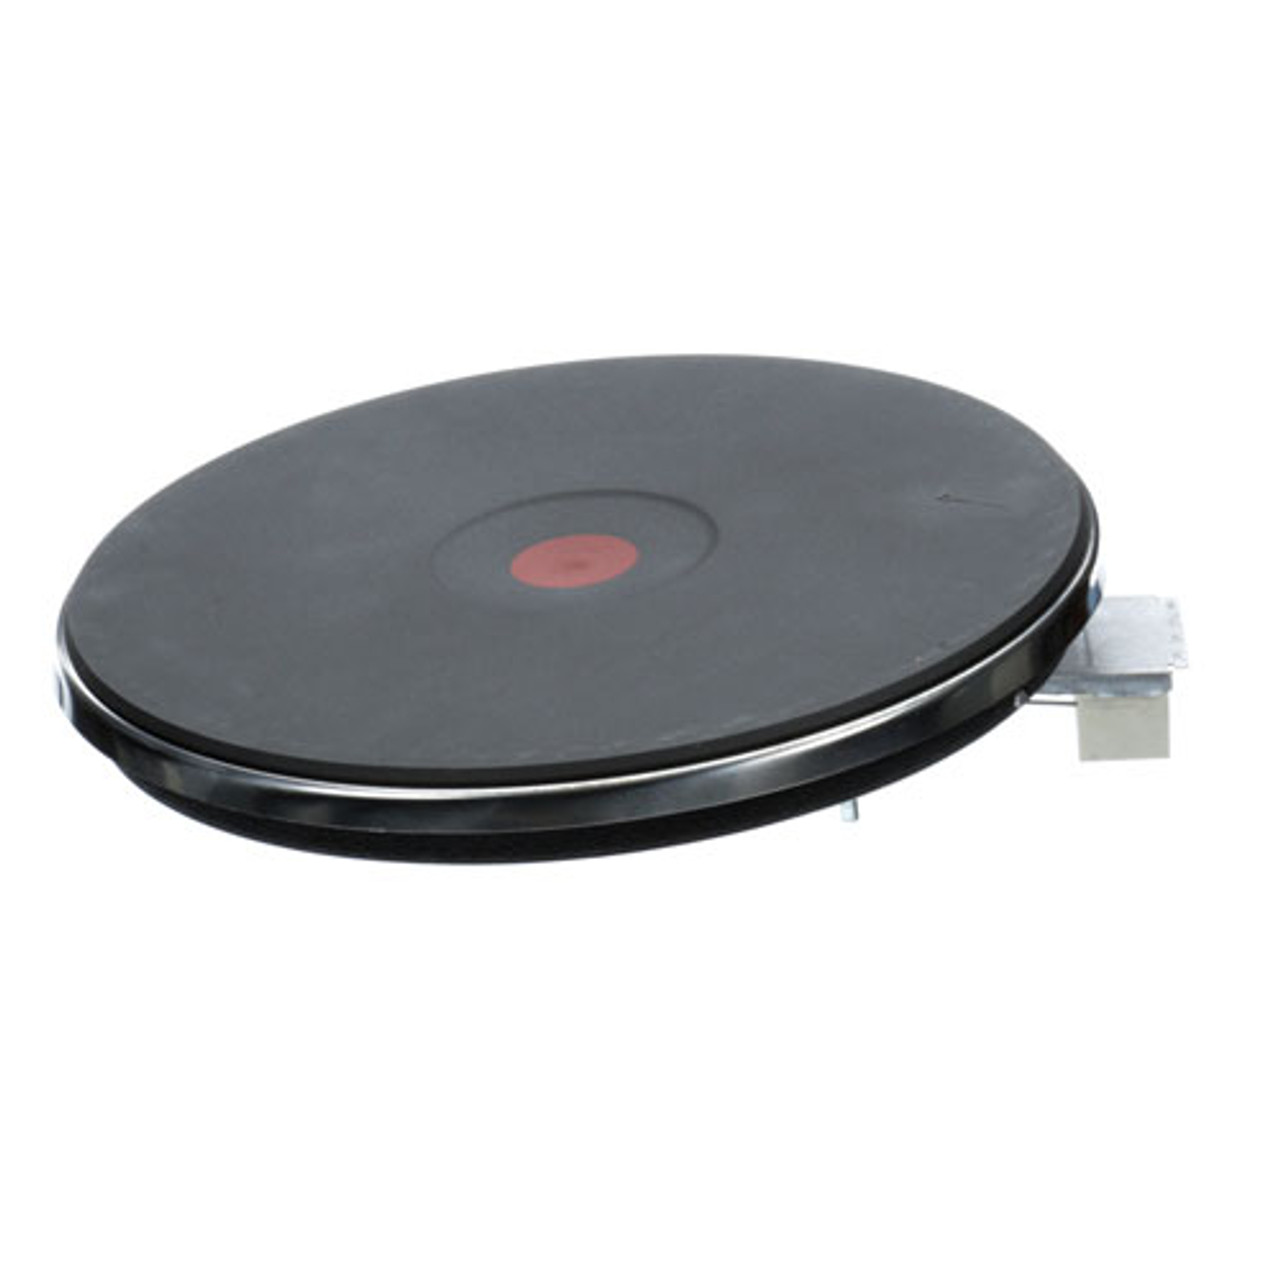 Hotplate, 2600W/480V - Replacement Part For Southbend 34127